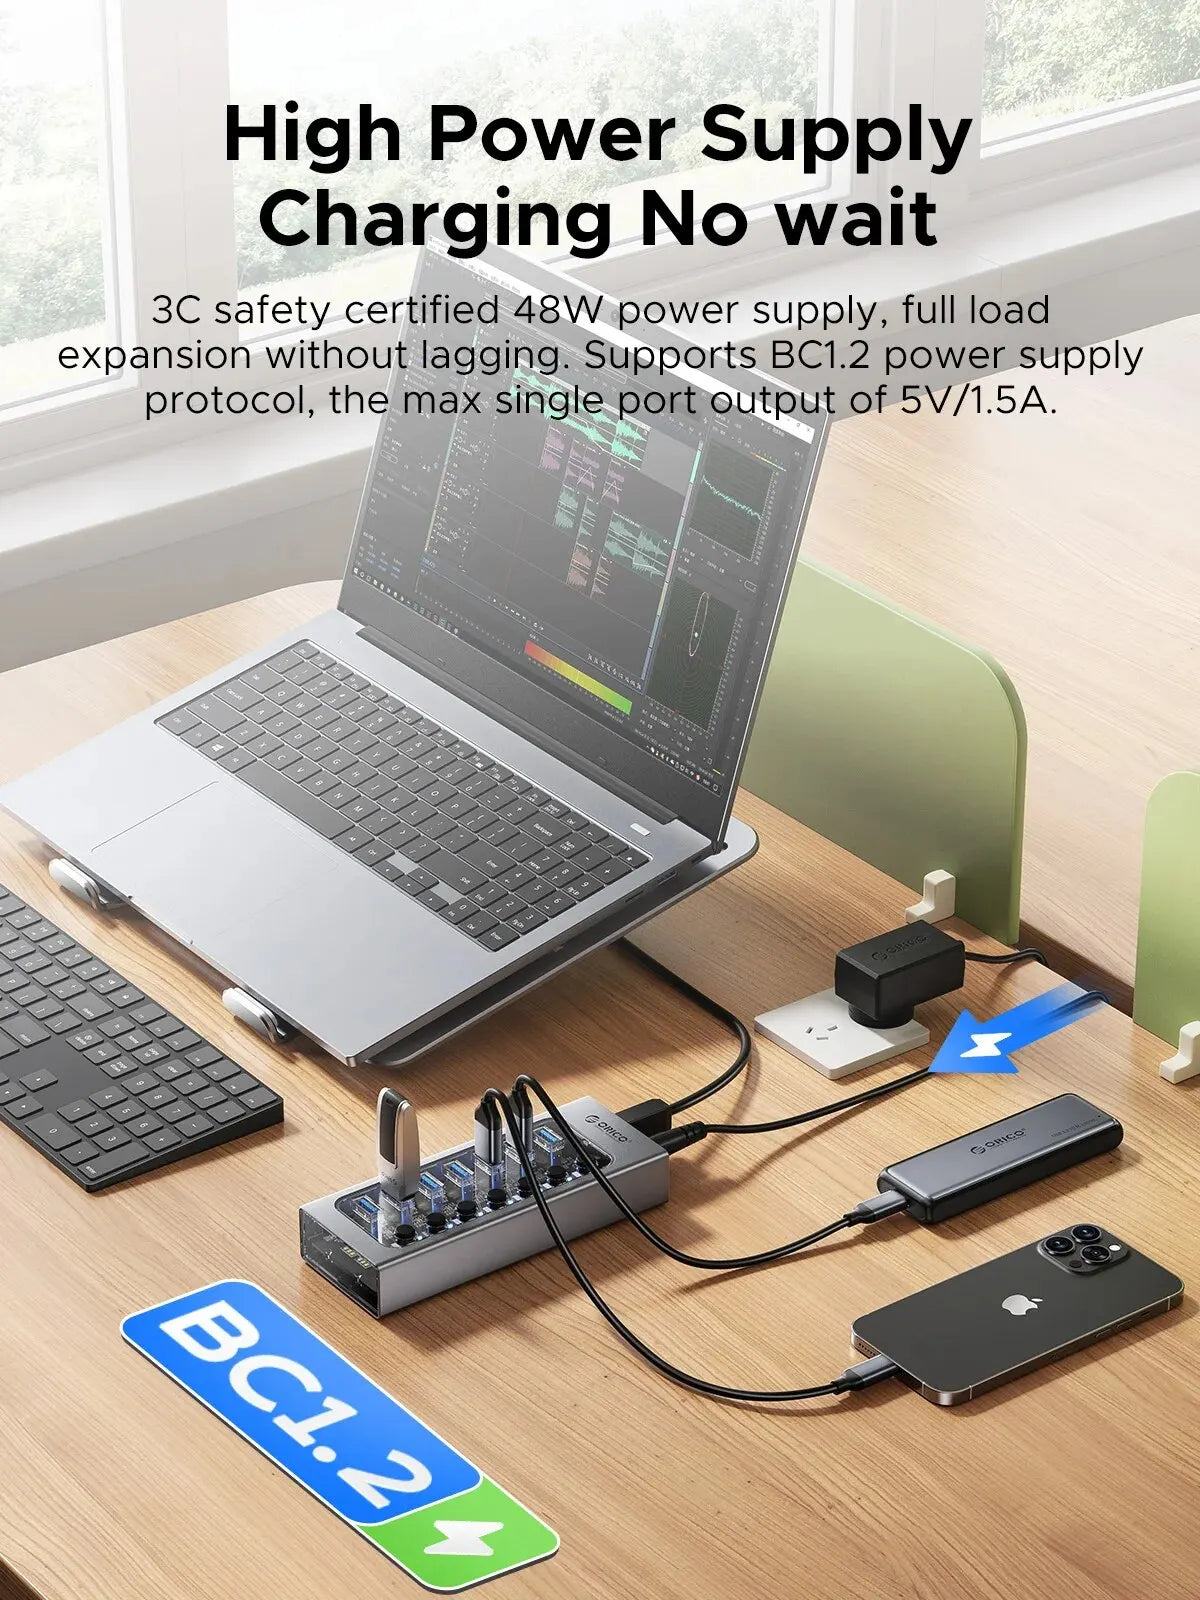 Industrial-Grade Aluminum 7-Port USB3.0 Hub with 12v Power Adapter for Macbook, Mobile Phones, and Tablets